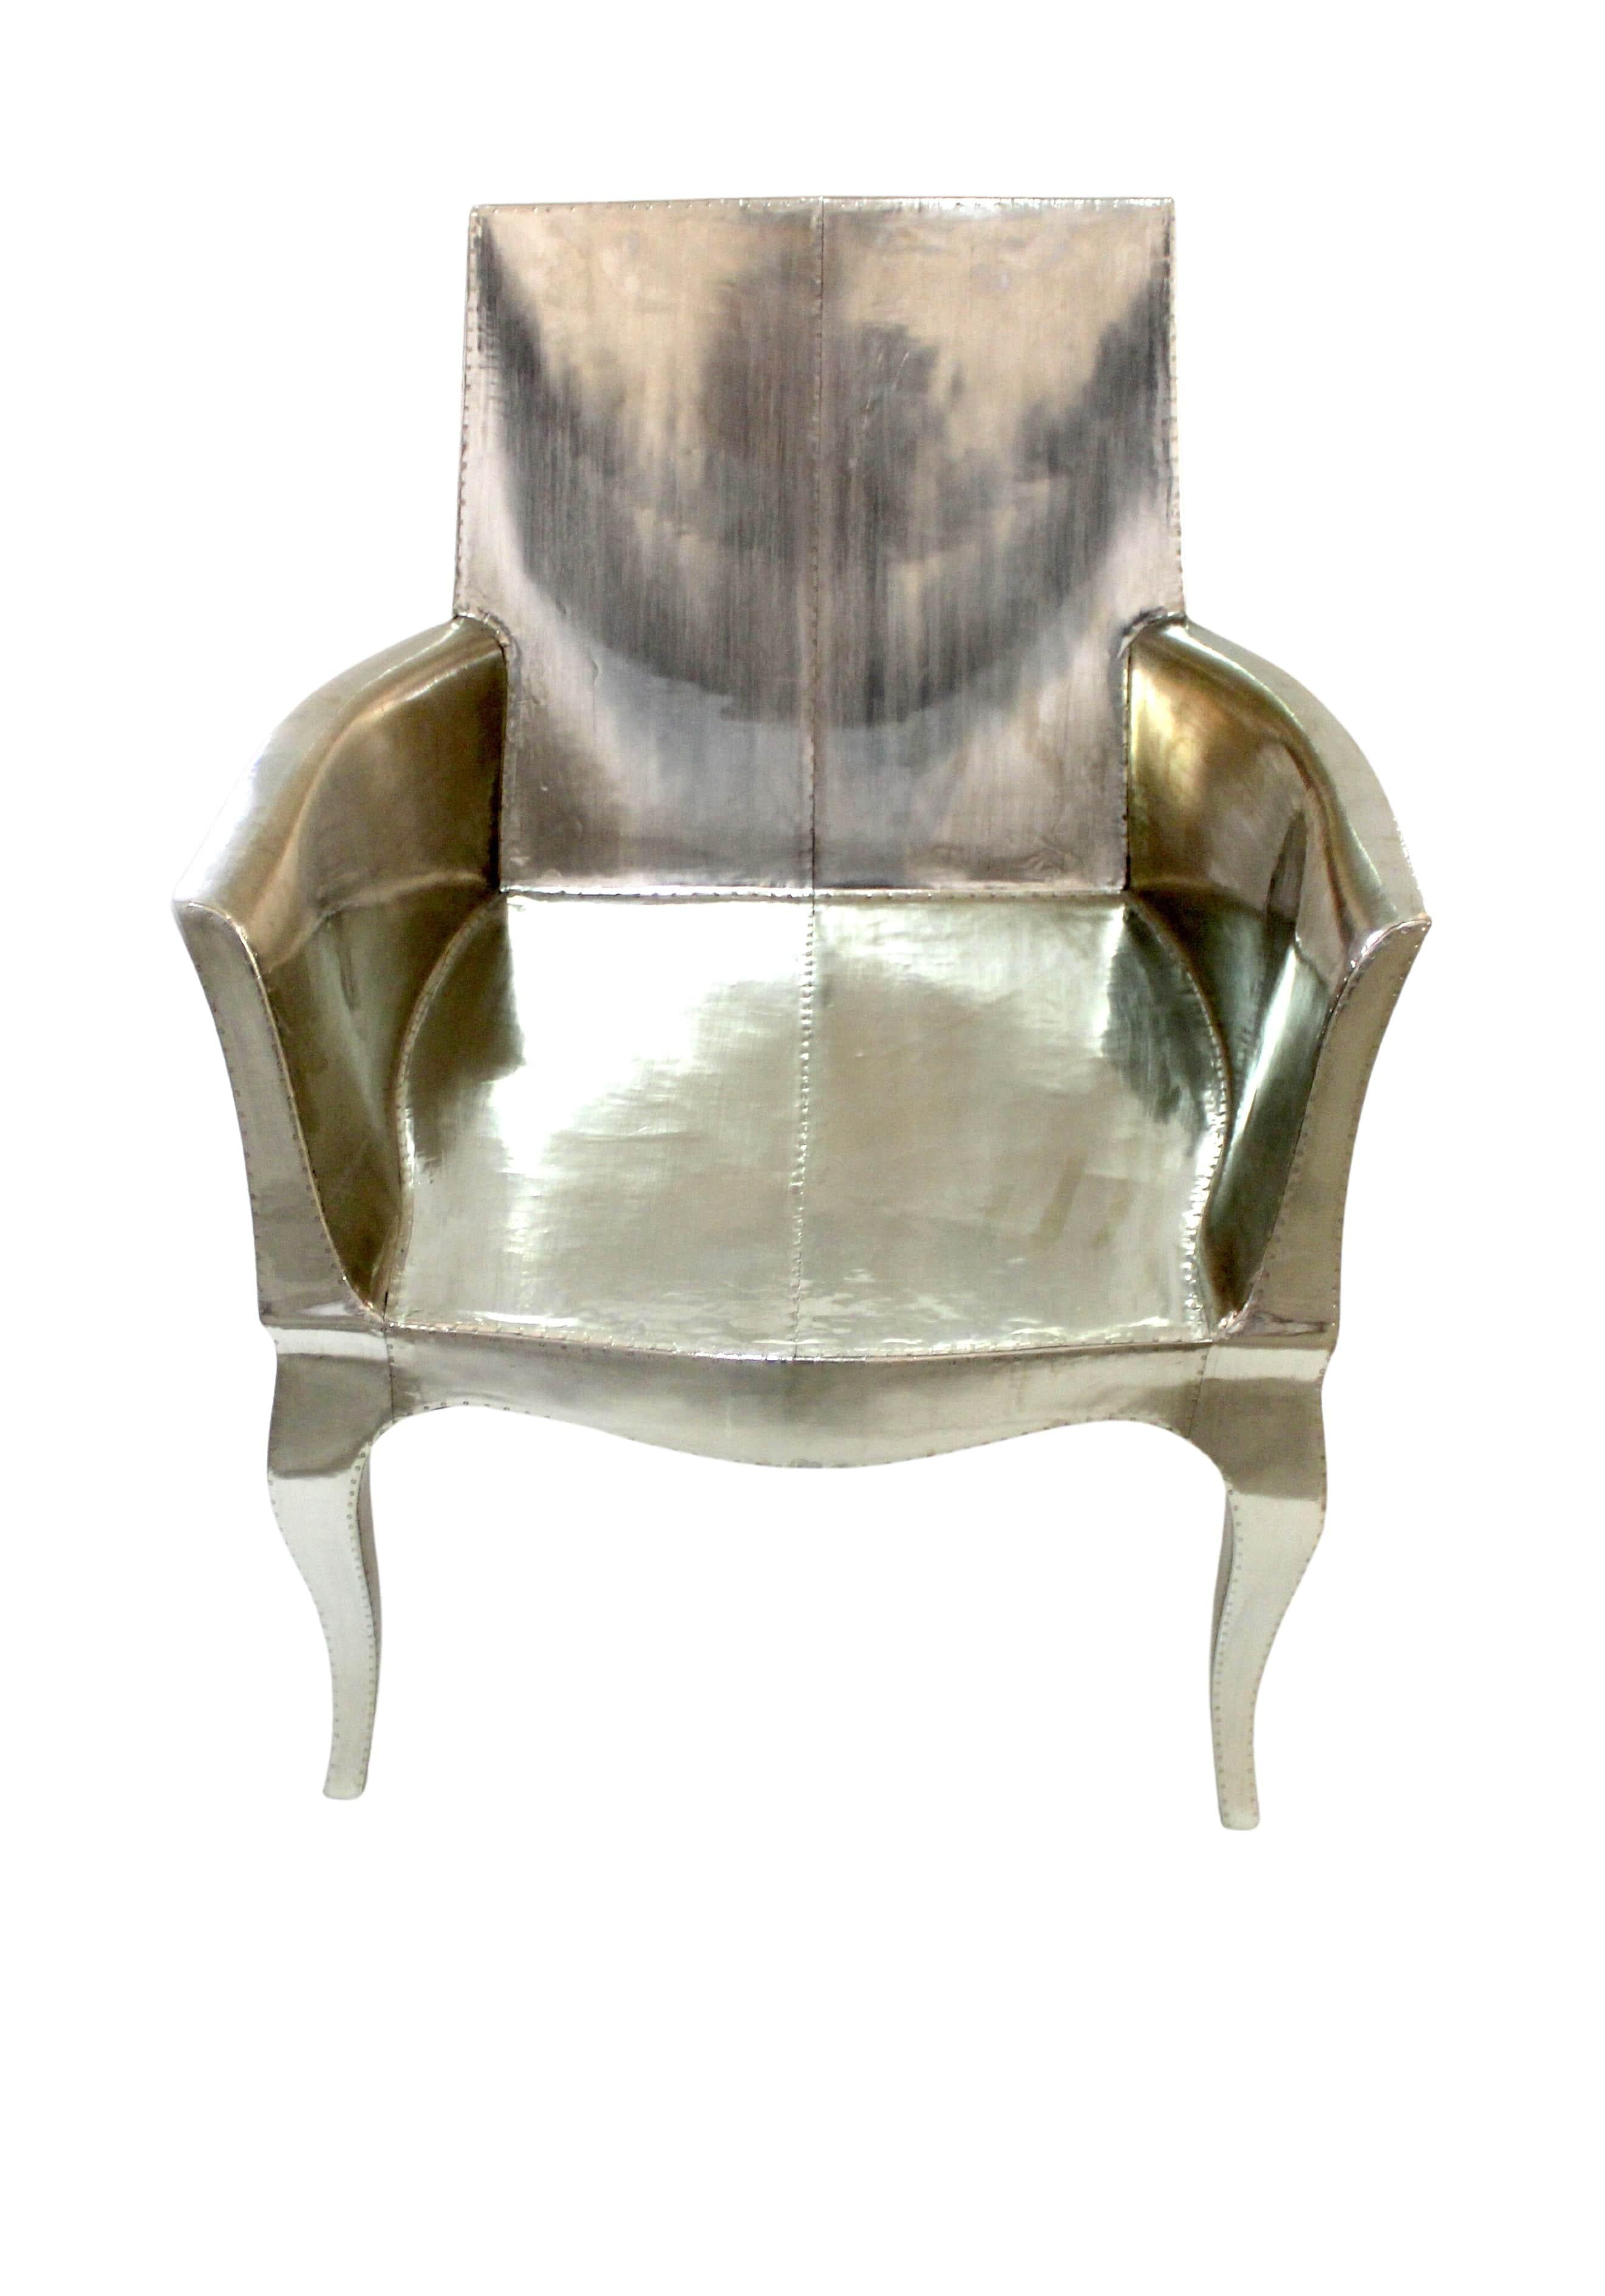 Indian Art Deco Side Chairs Pair Designed by Paul Mathieu for Stephanie Odegard For Sale